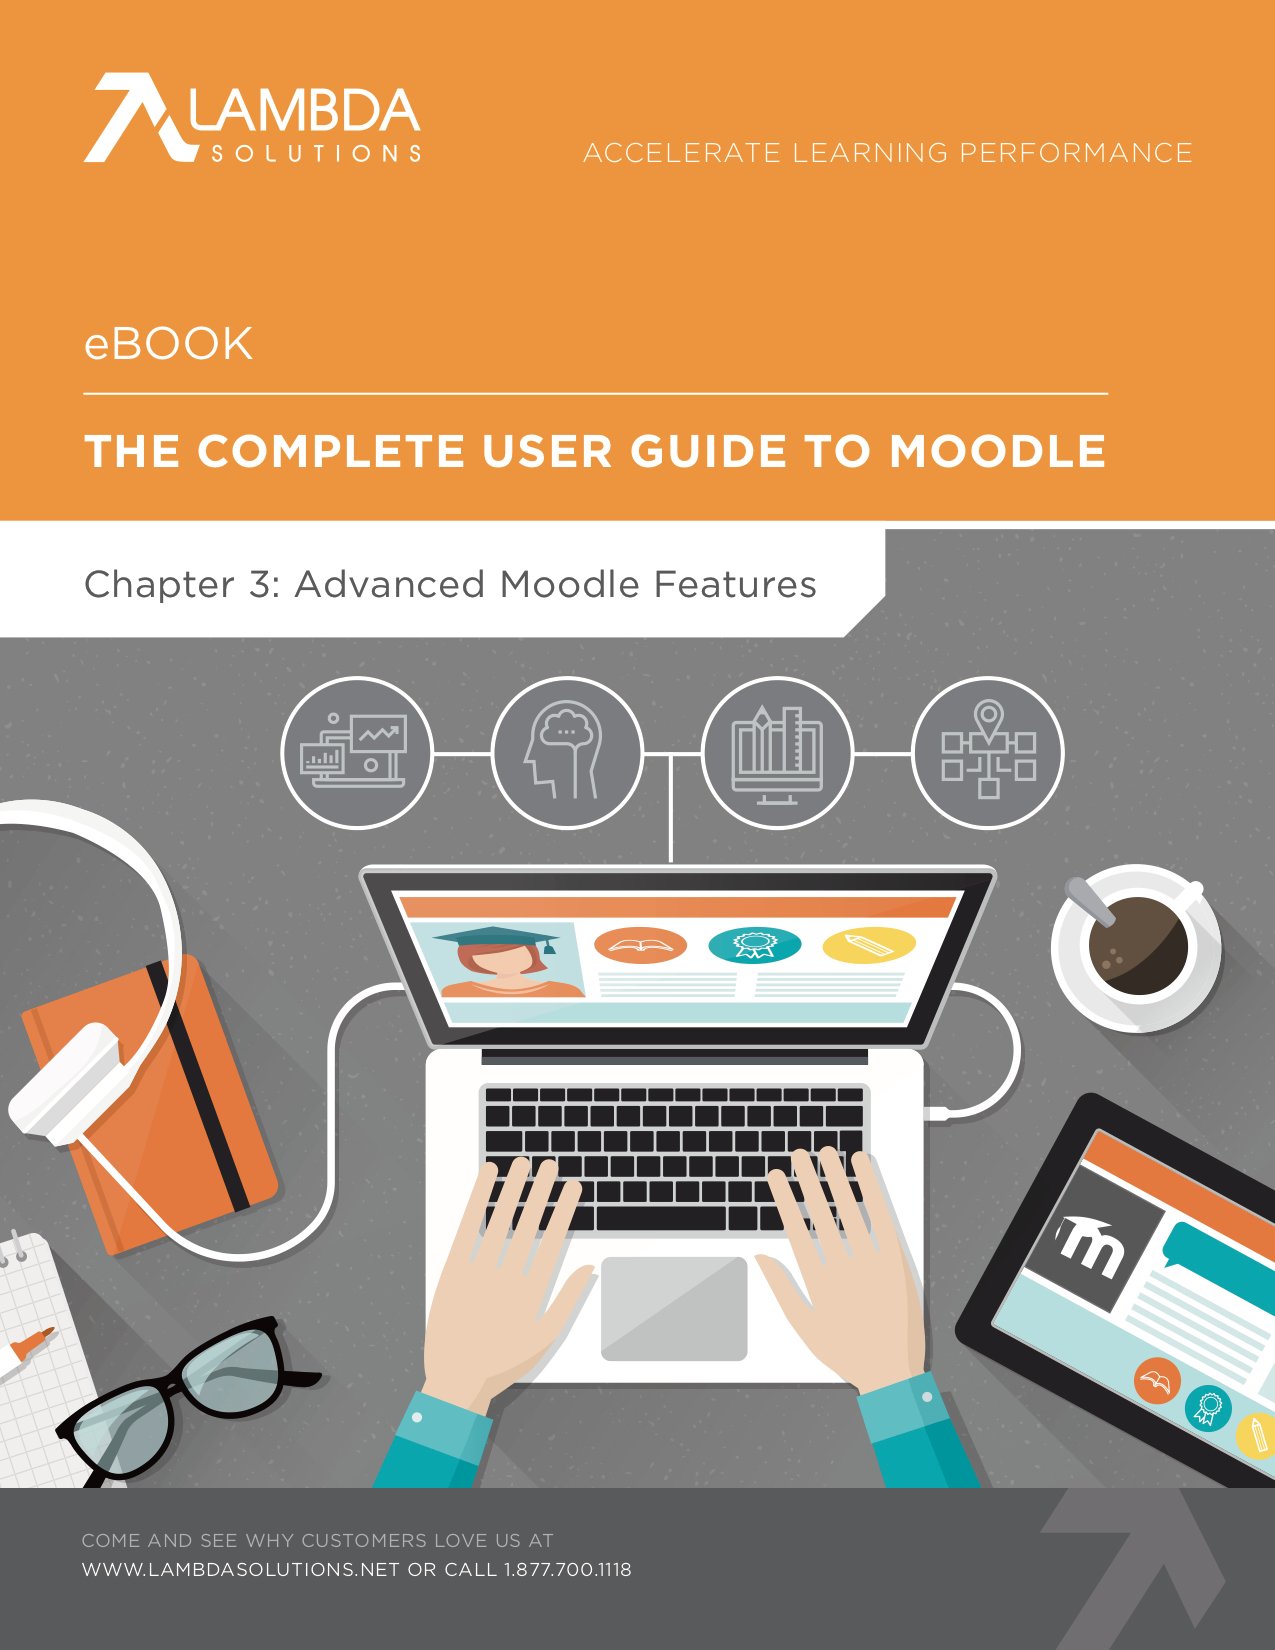 image moodle user guide advaced features chapter 3 cover